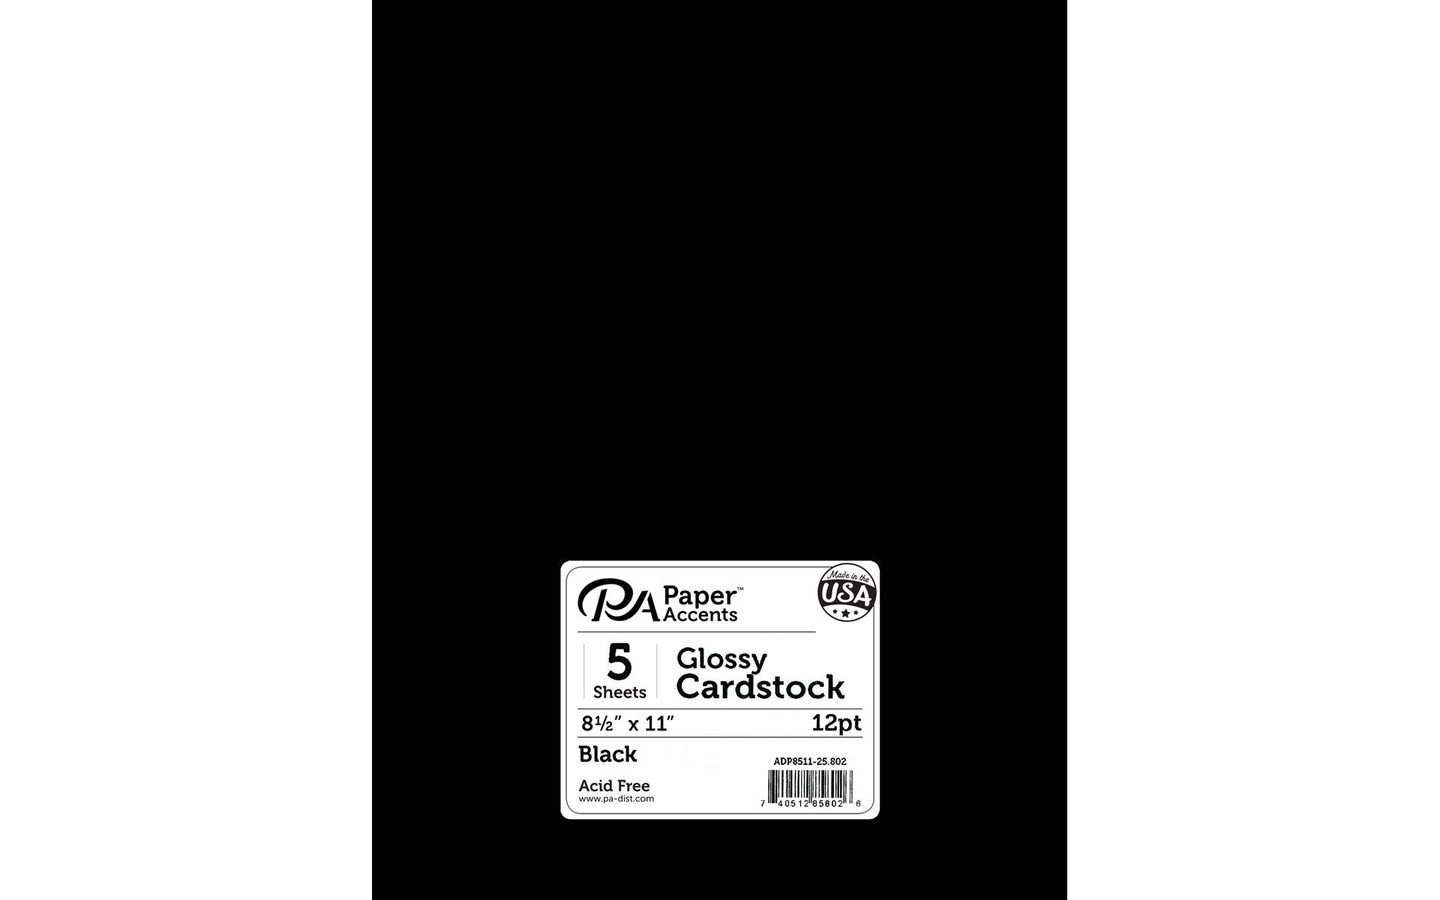 PA Paper Accents Glossy Cardstock 8.5&#x22; x 11&#x22; Black, 12pt colored cardstock paper for card making, scrapbooking, printing, quilling and crafts, 5 piece pack